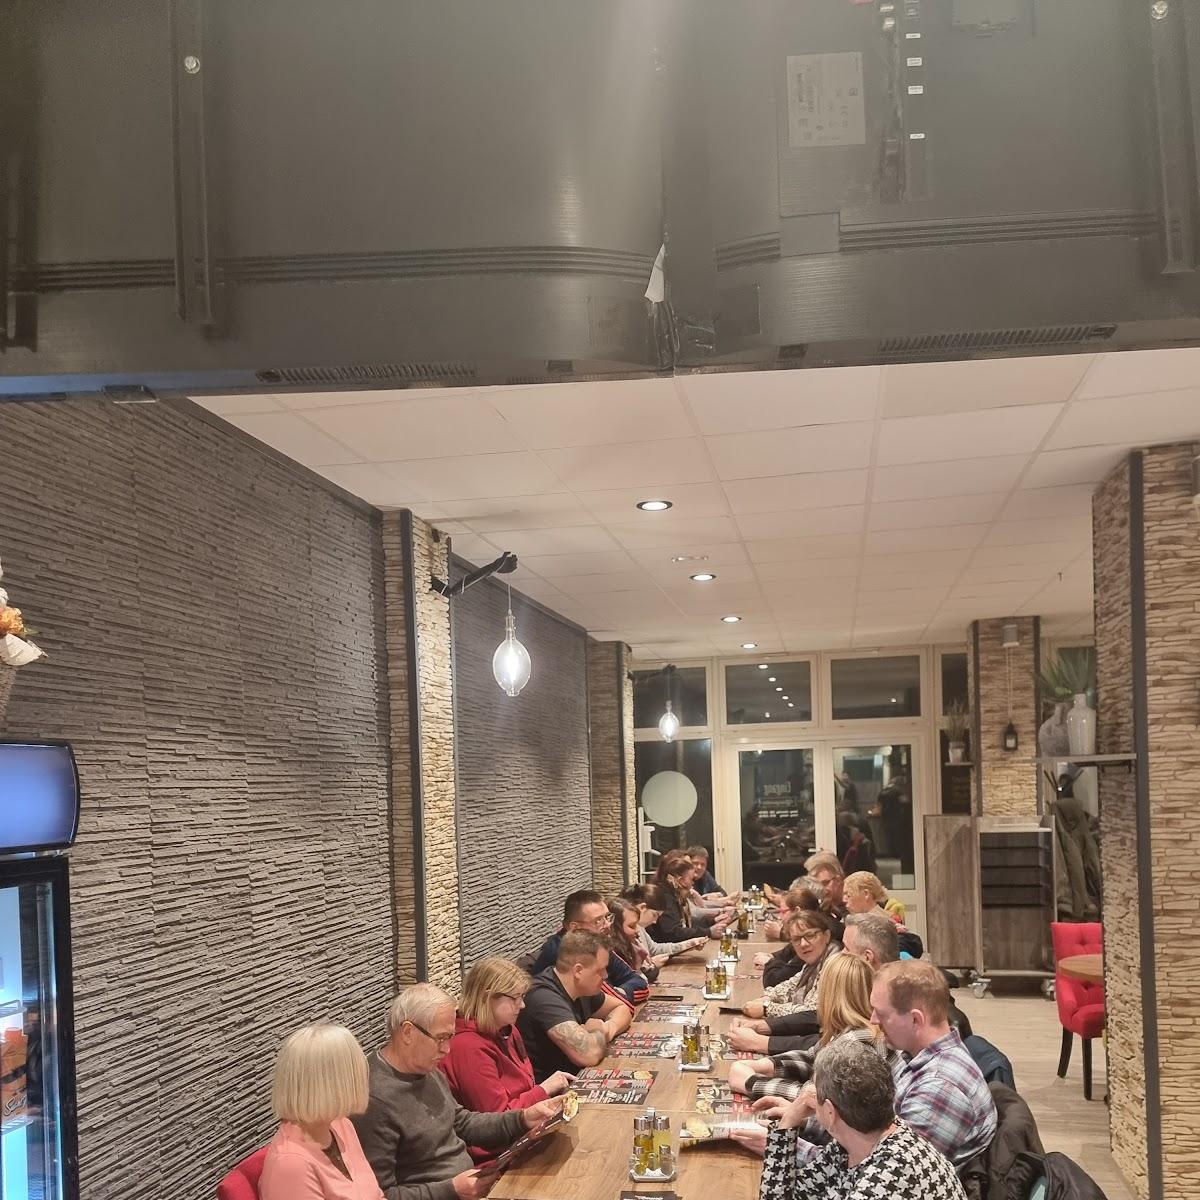 Restaurant "Torino pizza kebap house walsrode" in Walsrode